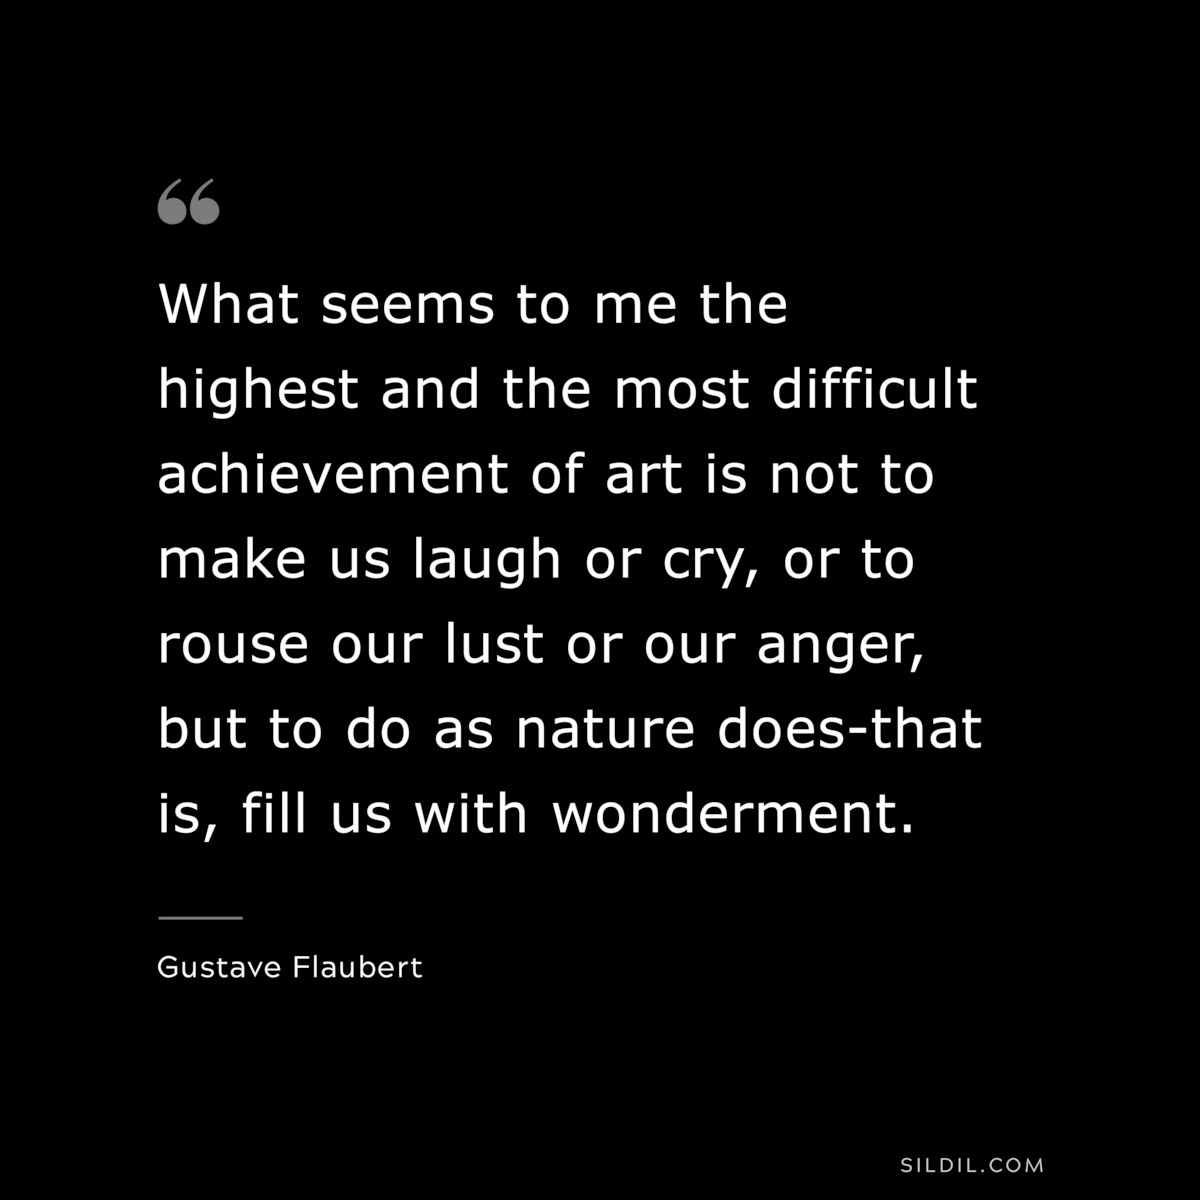 What seems to me the highest and the most difficult achievement of art is not to make us laugh or cry, or to rouse our lust or our anger, but to do as nature does-that is, fill us with wonderment. ― Gustave Flaubert